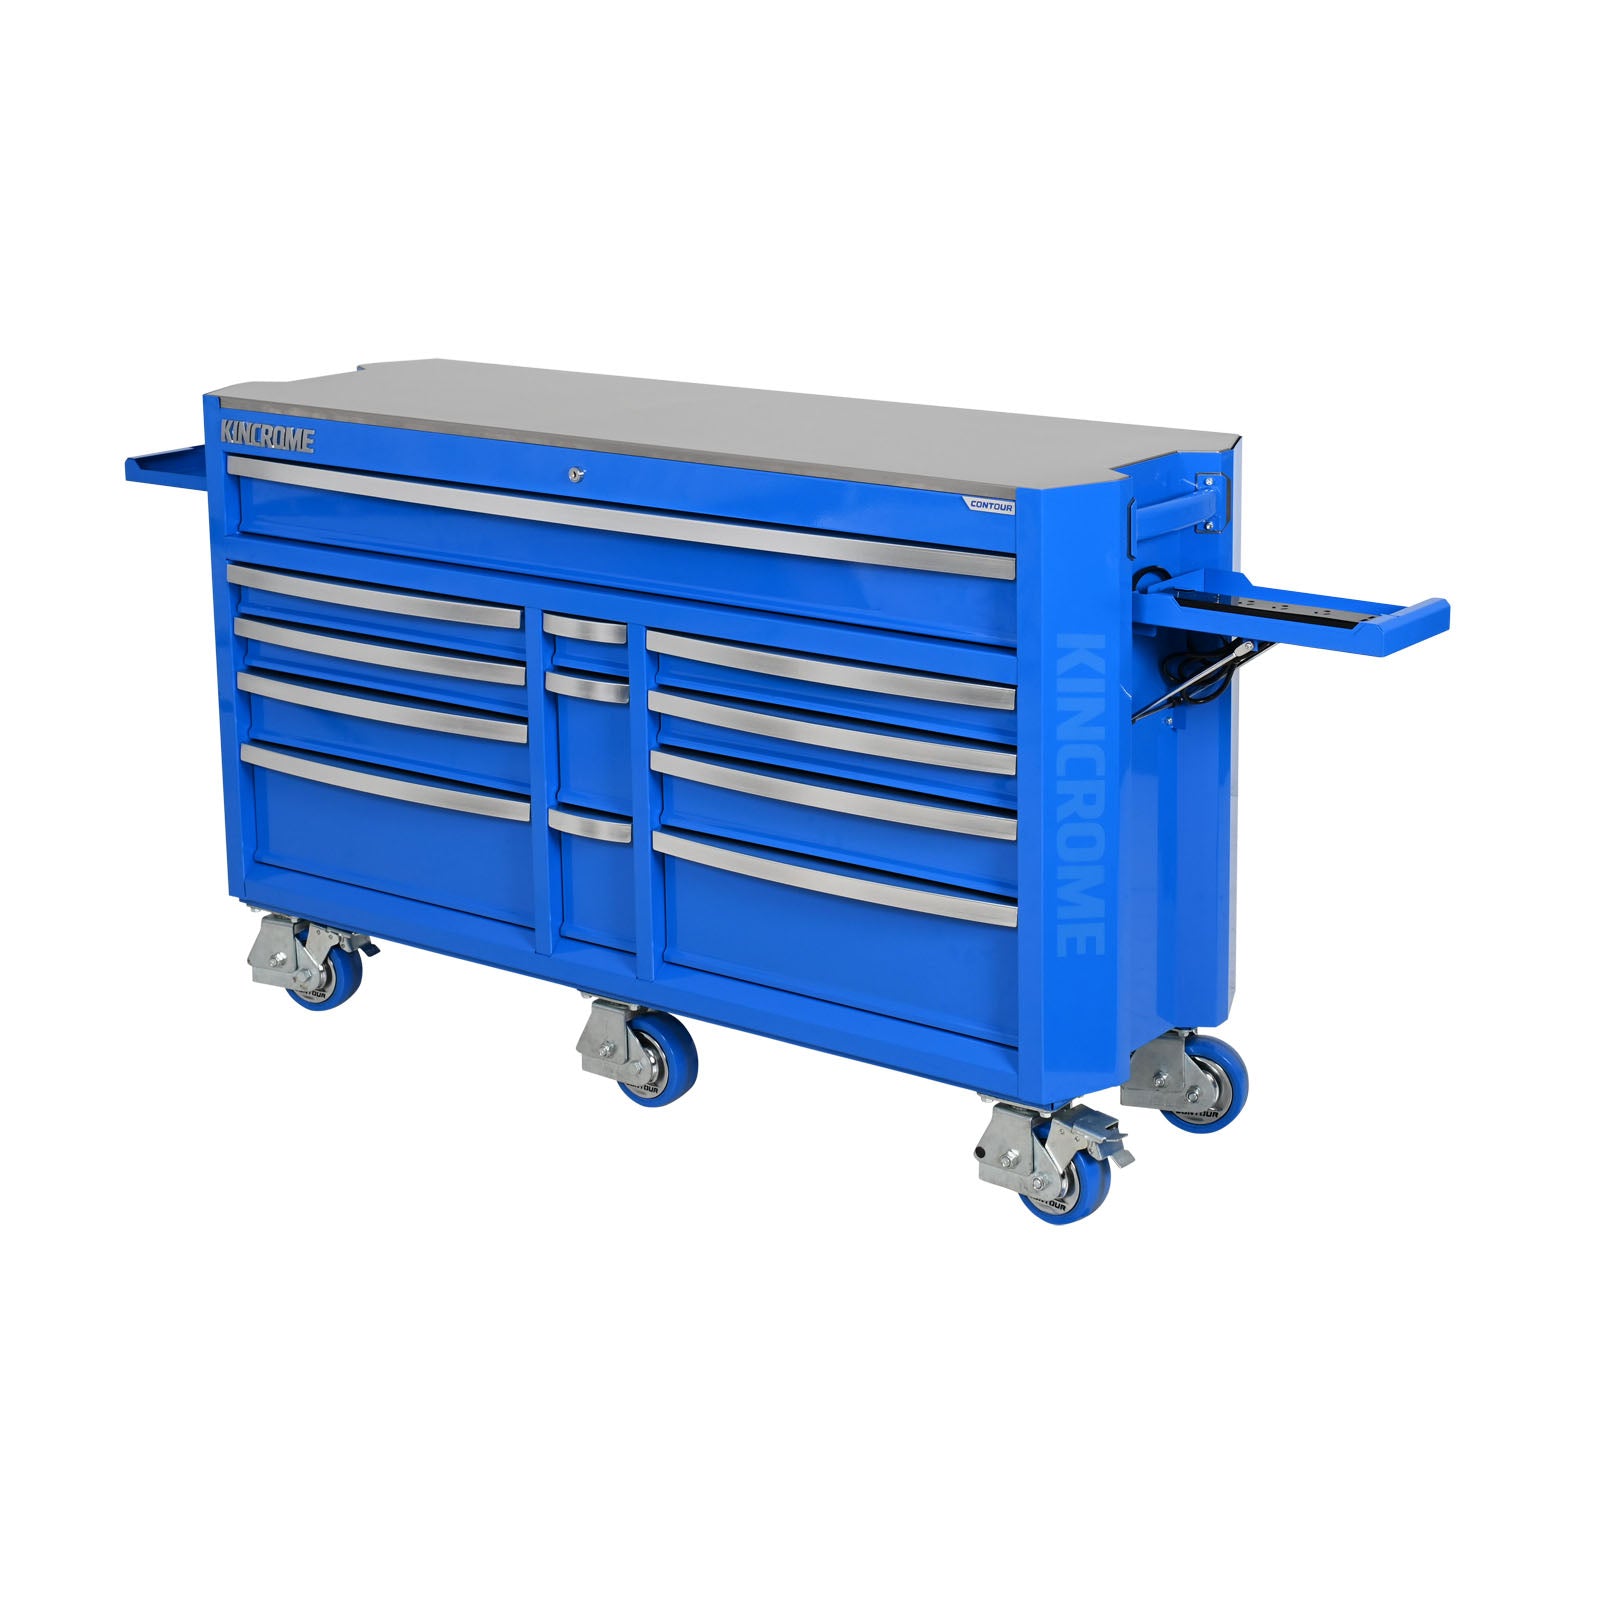 CONTOUR® Tool Trolley 12 Drawer 60" Blue - K76112 by Kincrome